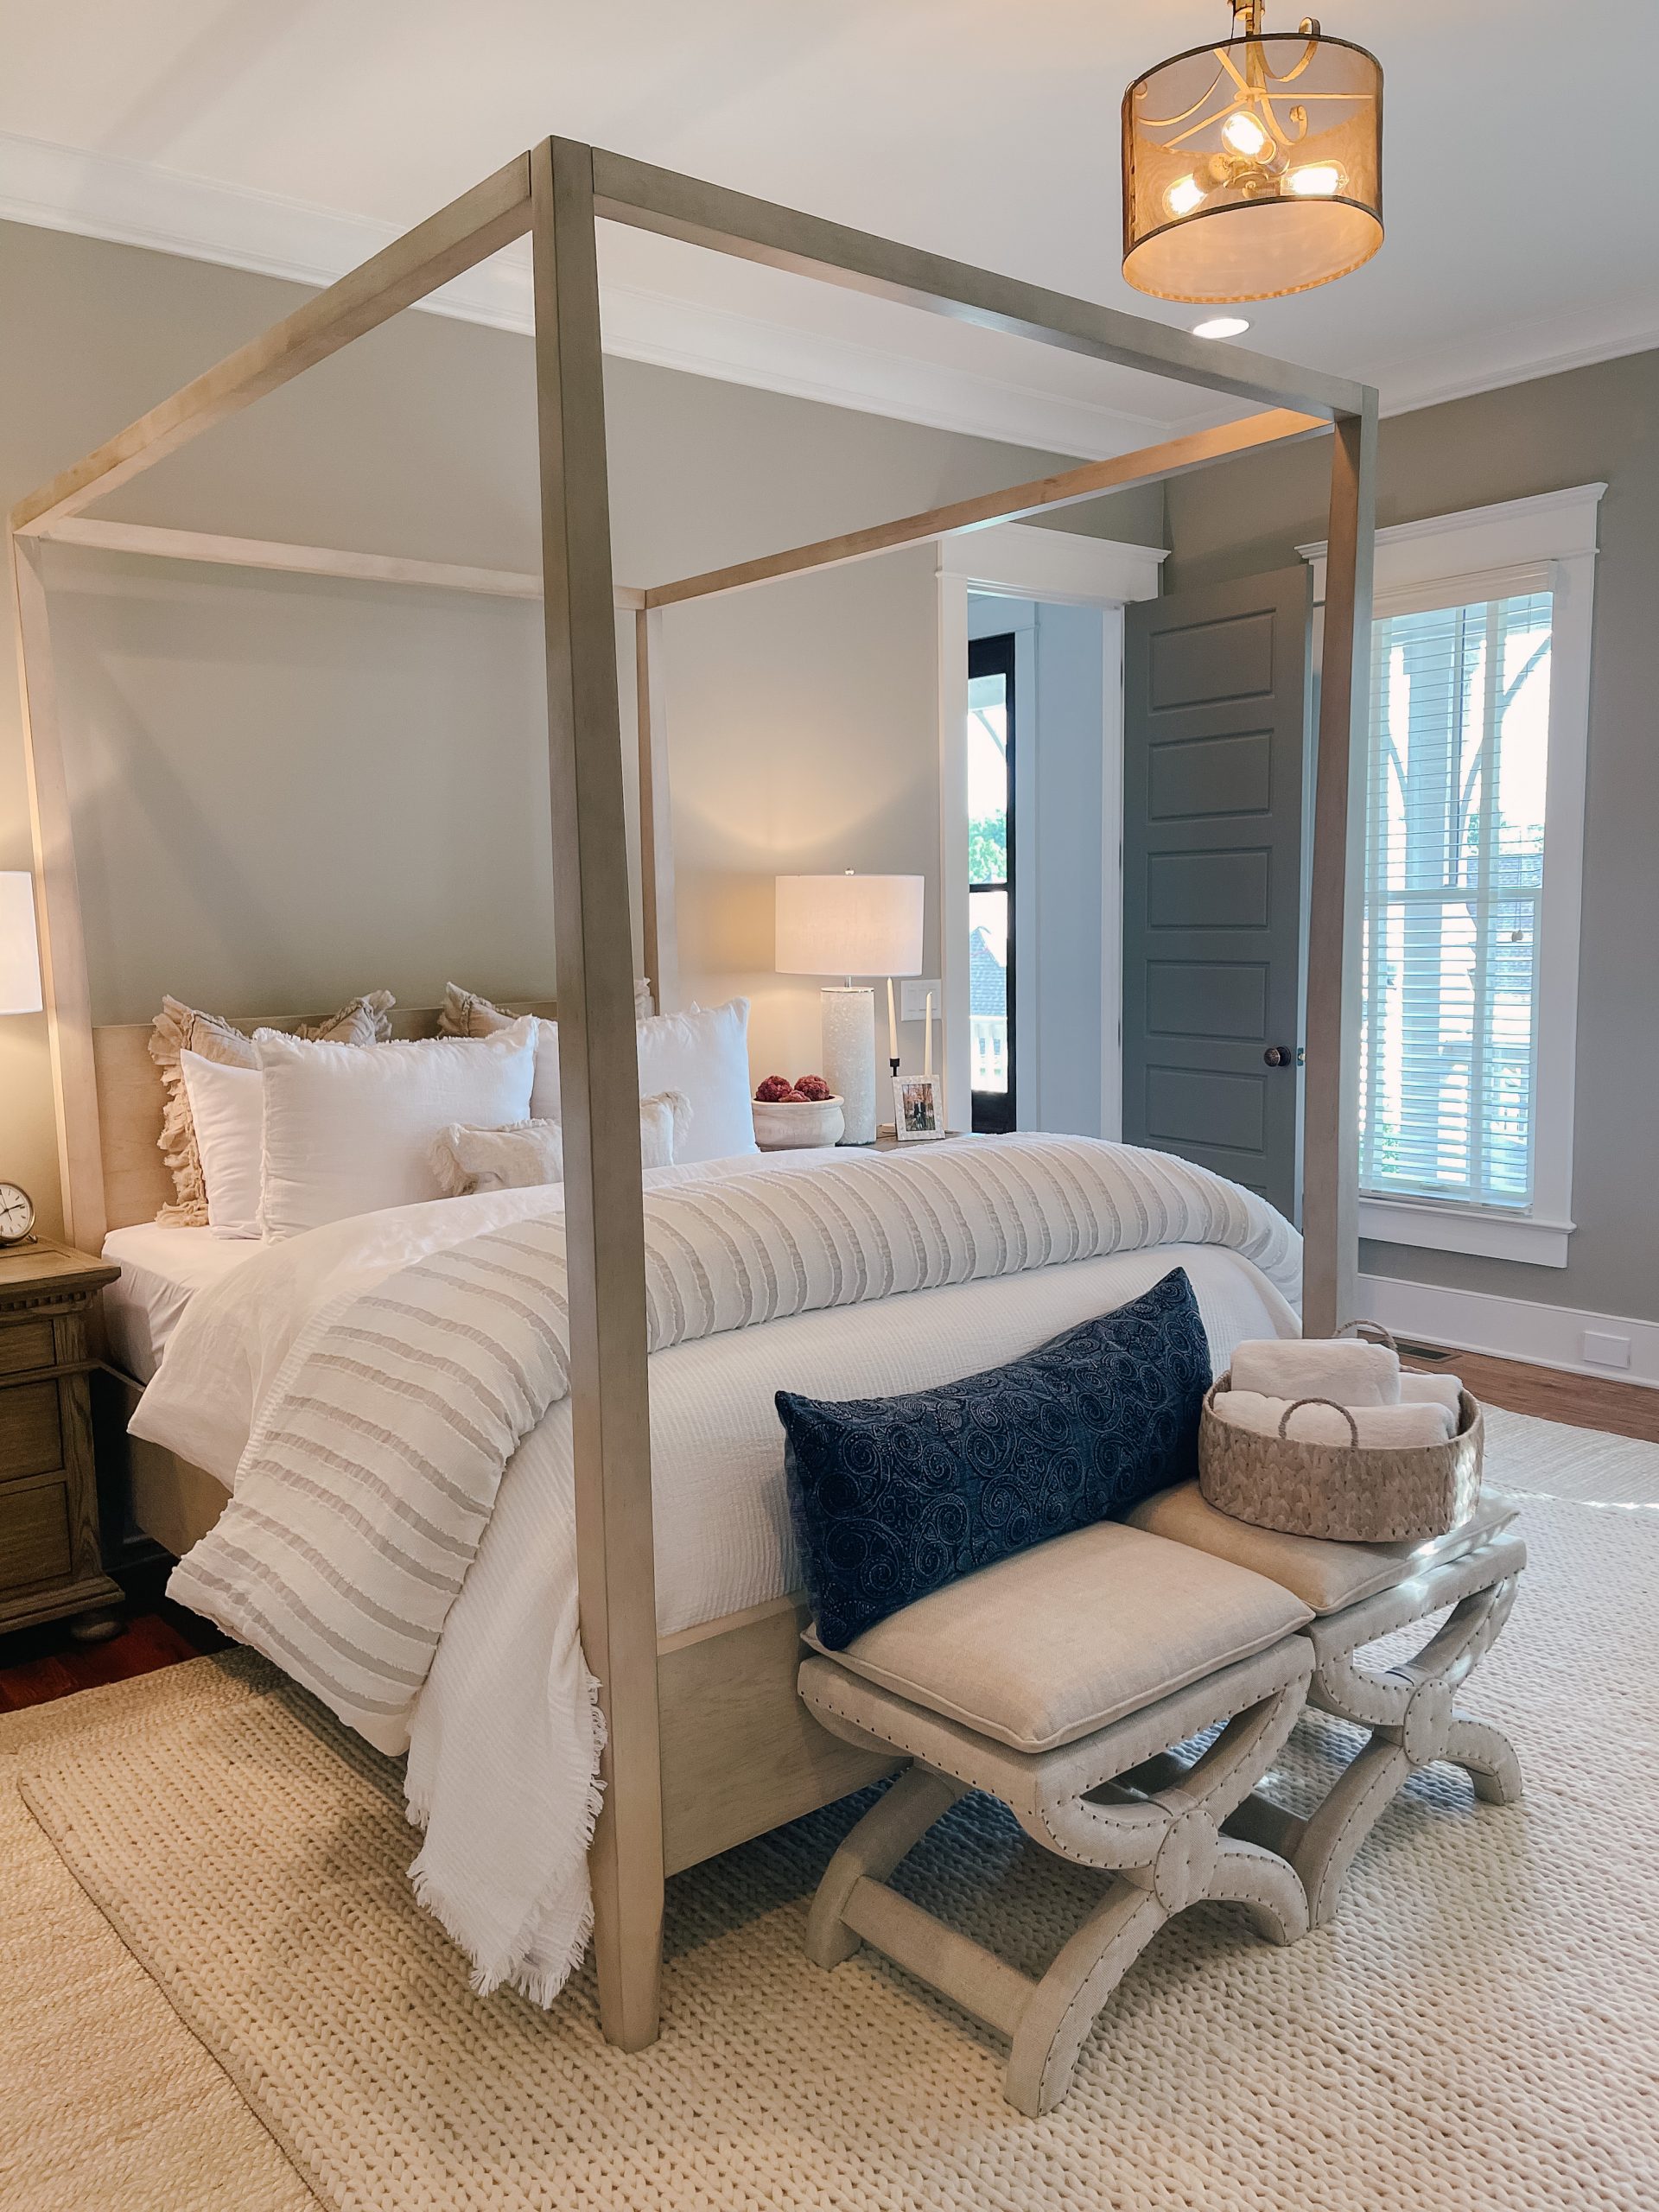 How to Share a Bedroom with a Light Sleeper